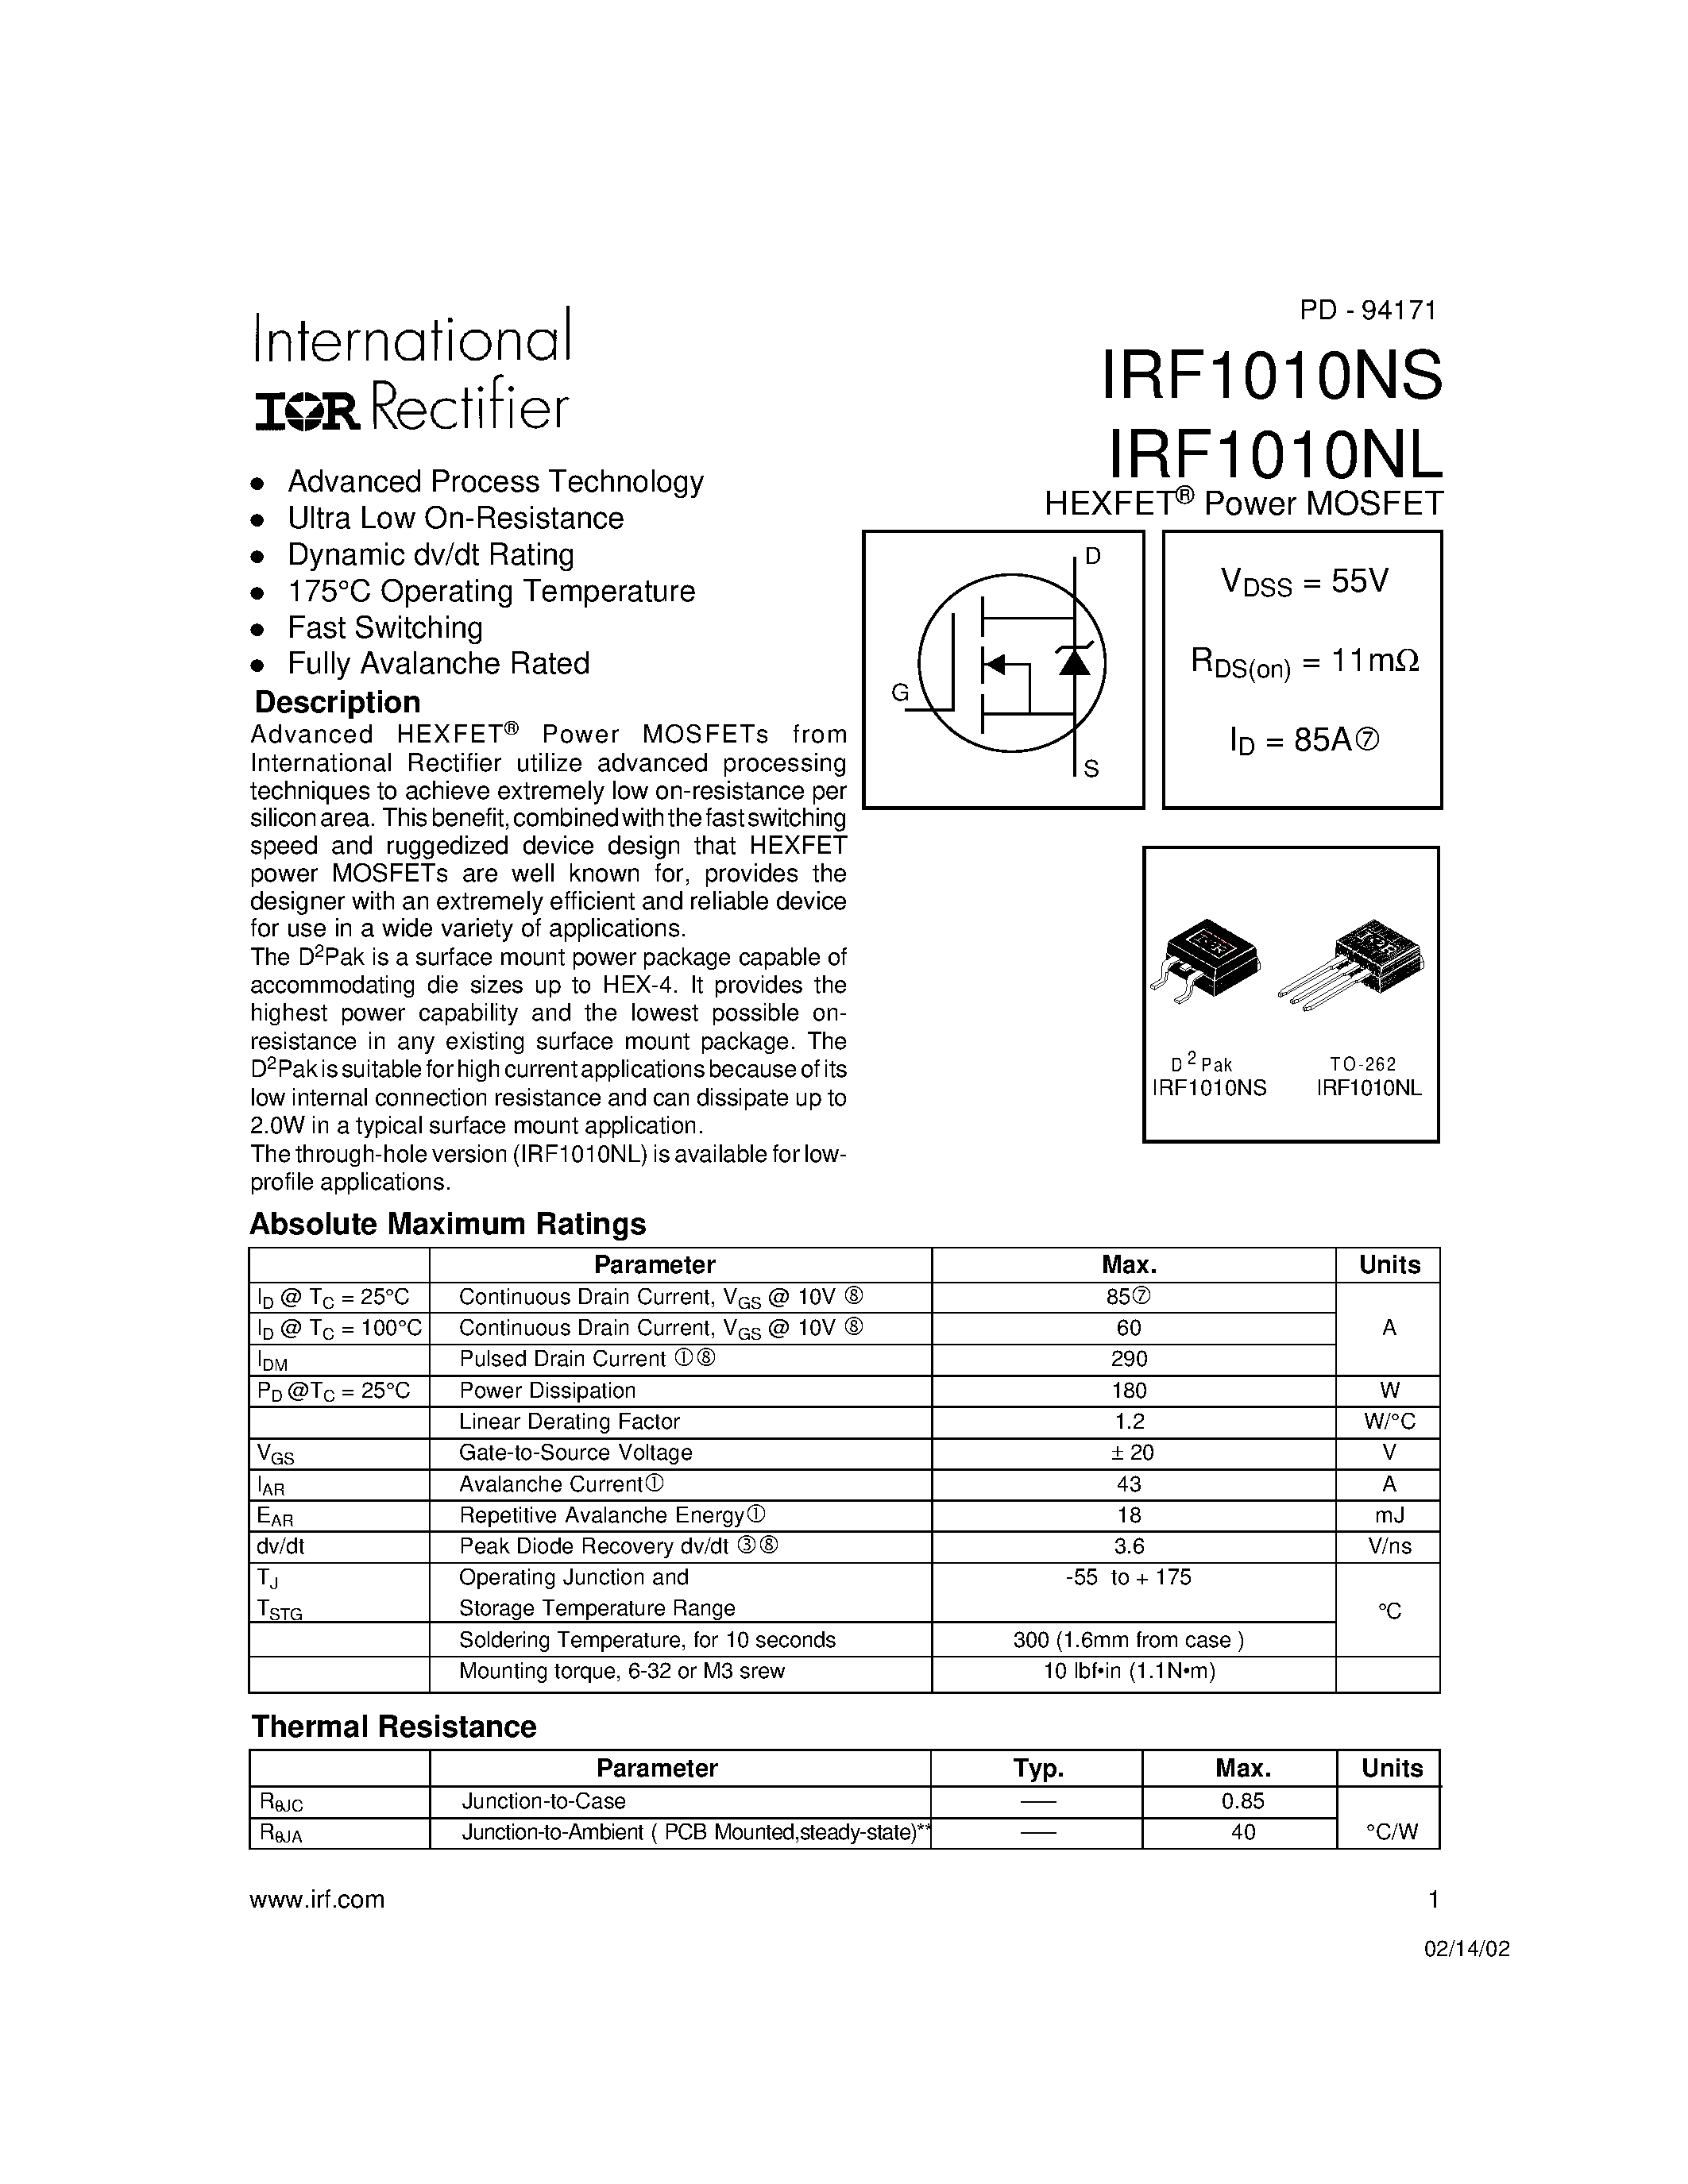 Даташит IRF1010NS - Power MOSFET(Vdss = 55 V/ Rds(on)=11mohm/ Id=85A) страница 1